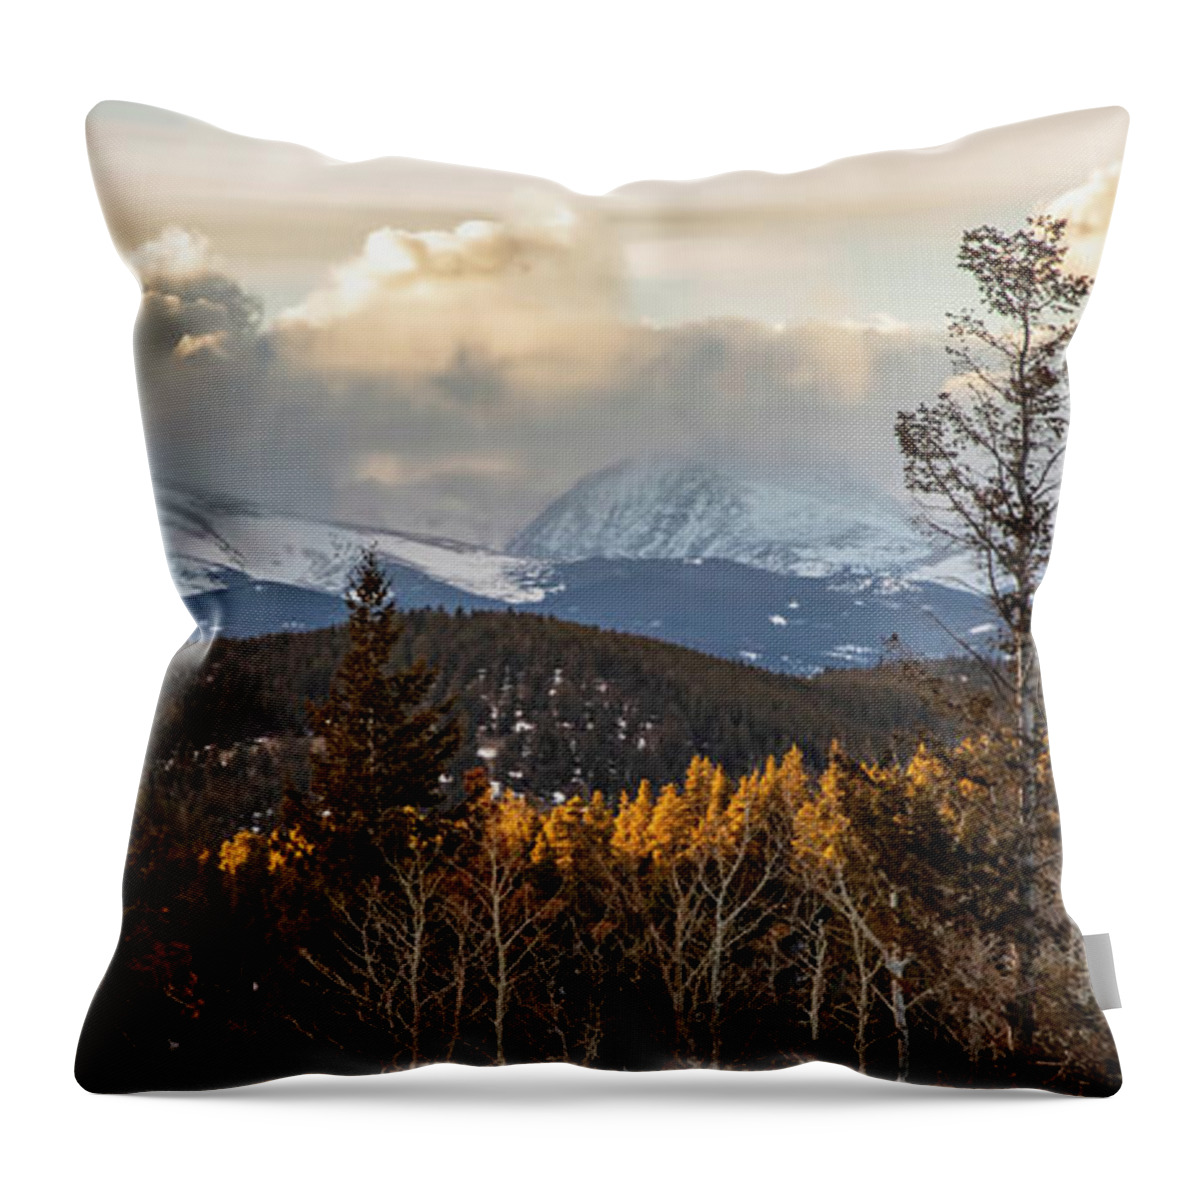 Sunset Throw Pillow featuring the photograph Fading Embers by Lorraine Baum